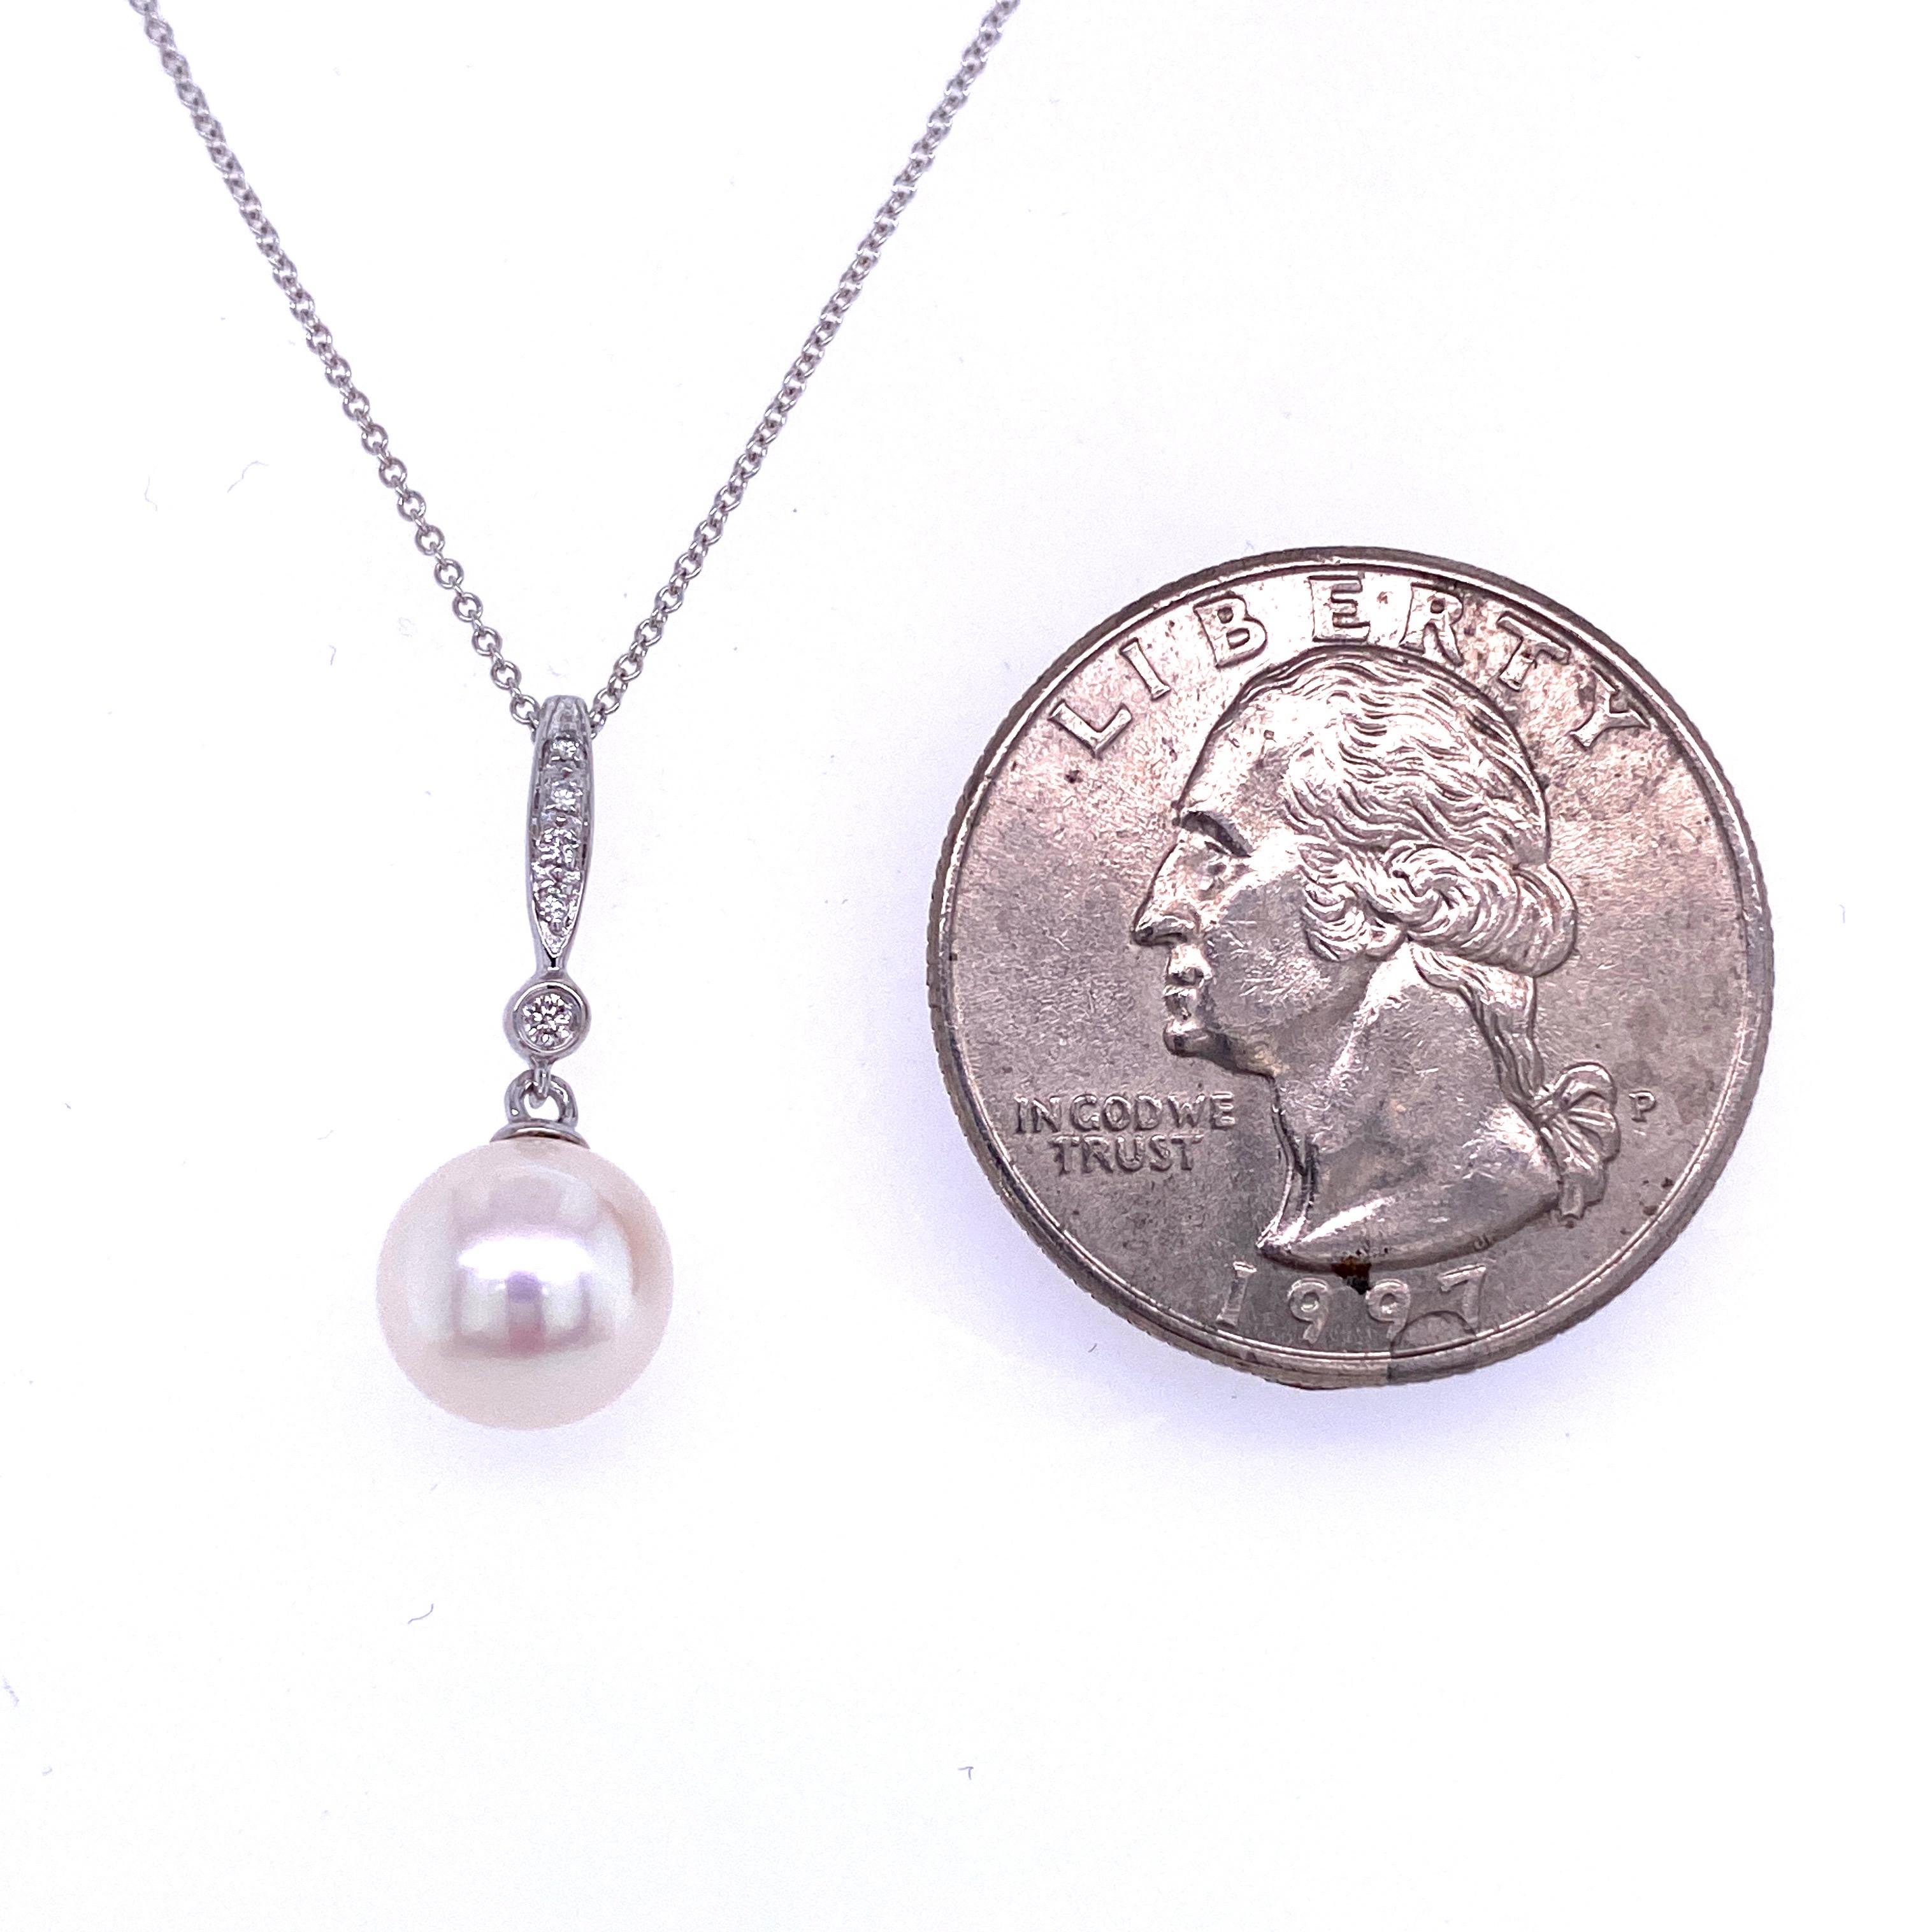 pearl drop necklace white gold